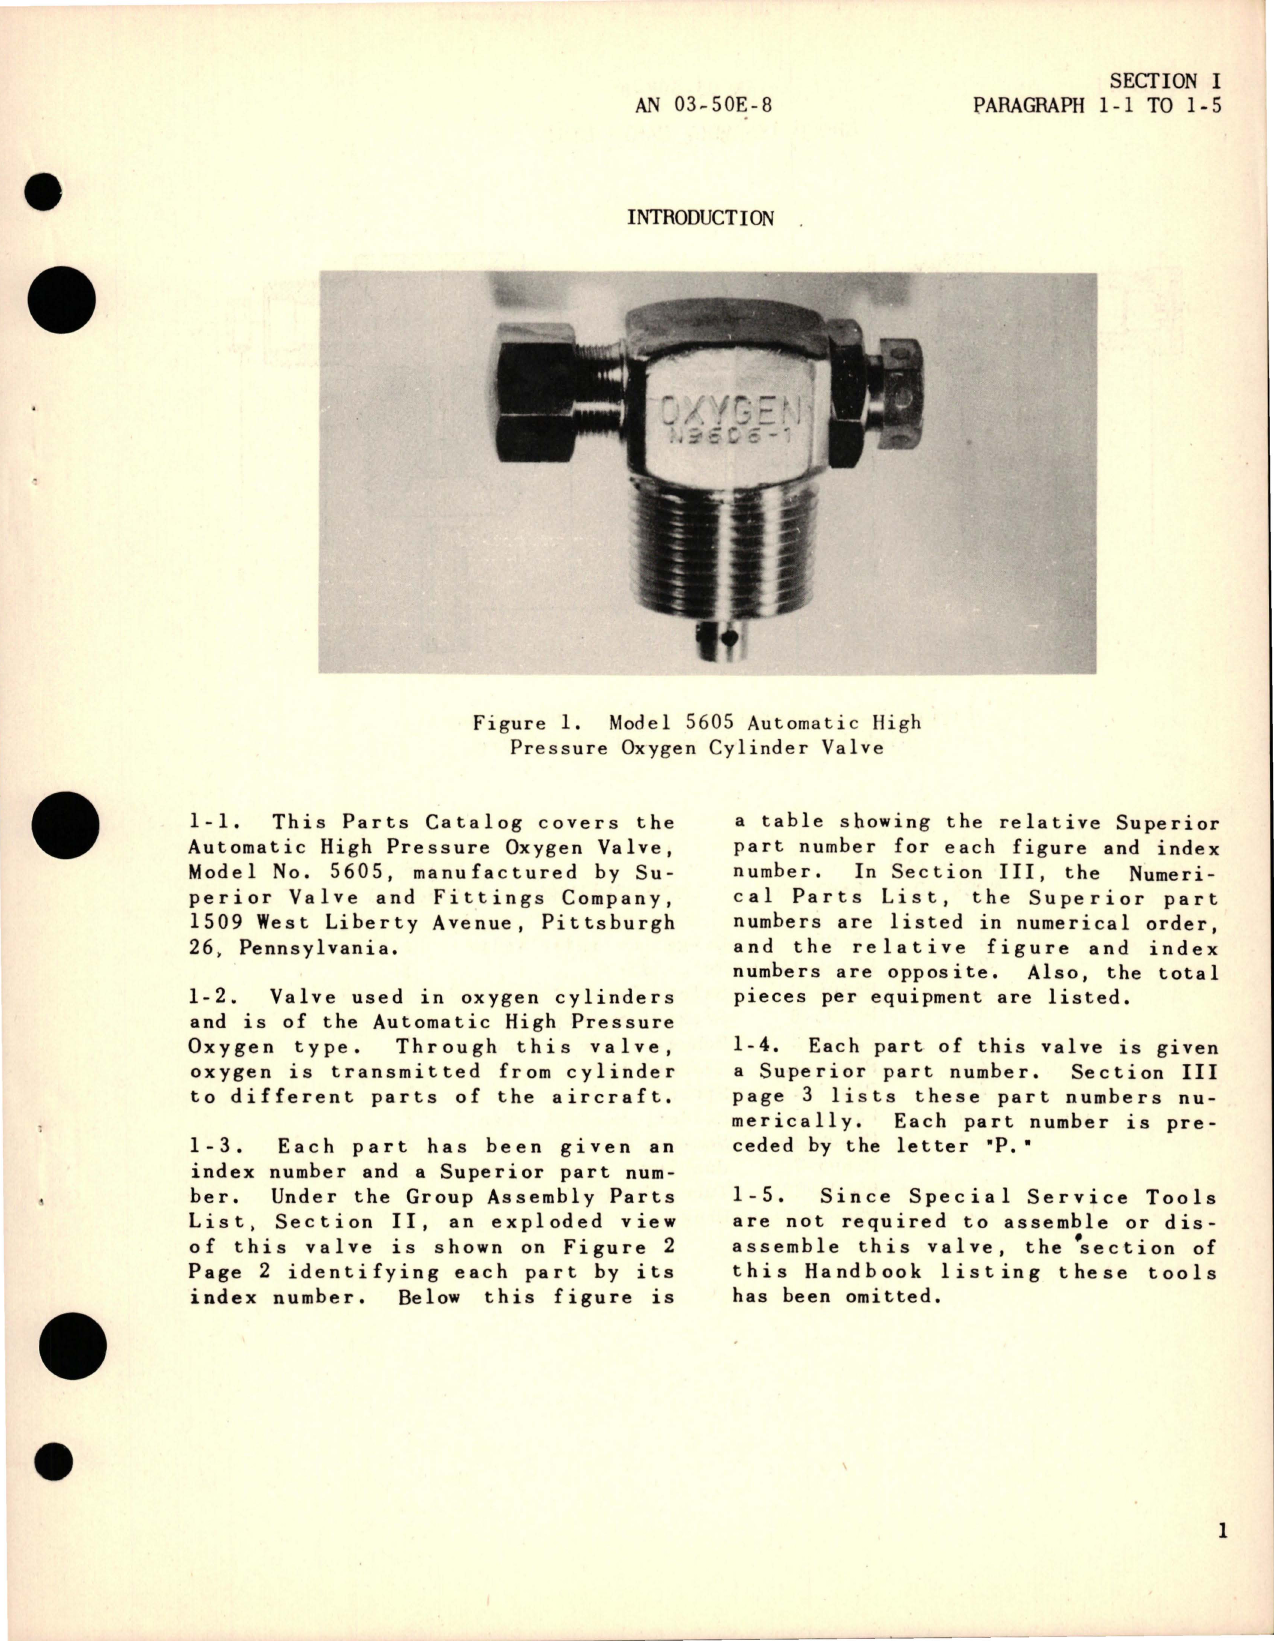 Sample page 5 from AirCorps Library document: Parts Catalog for Automatic High Pressure Oxygen Valve - Model 5605